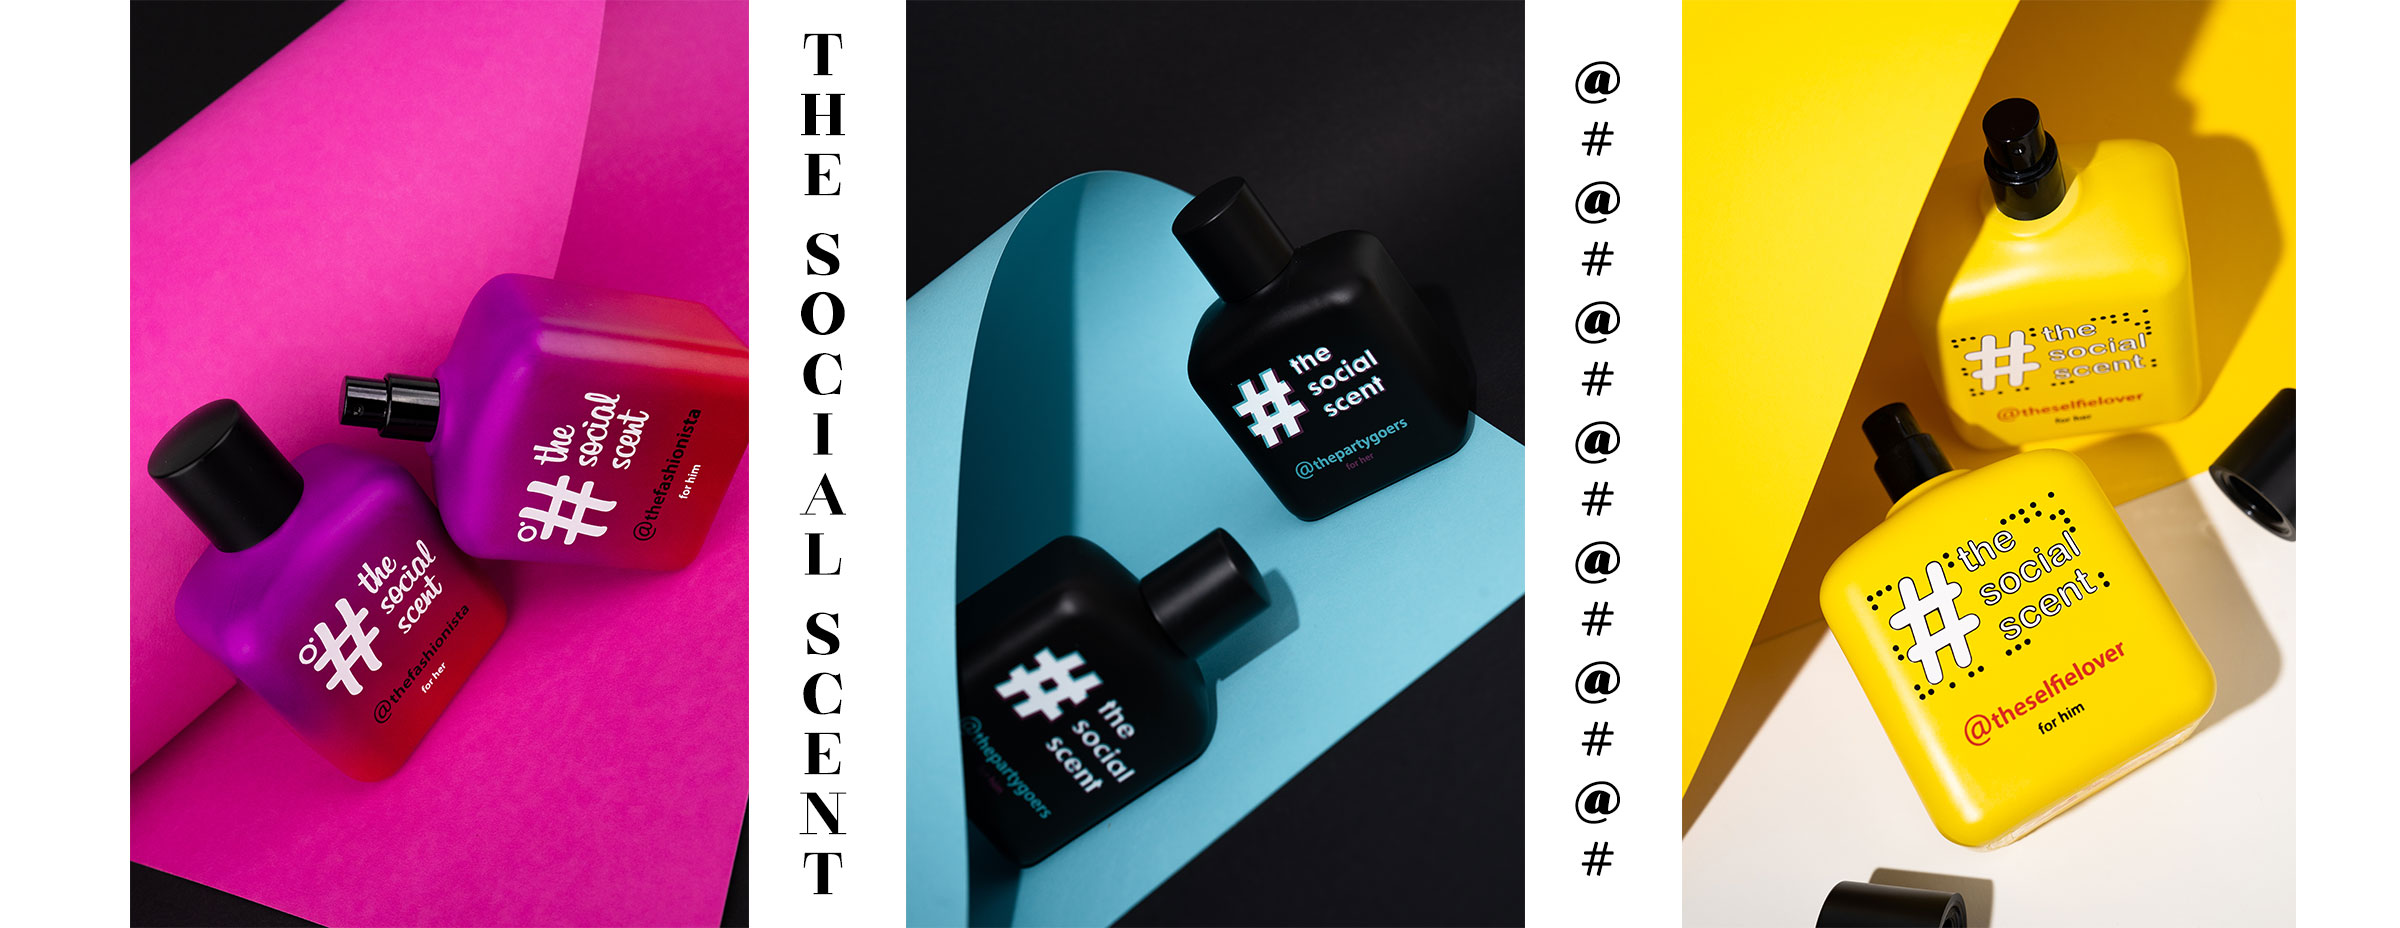 https://www.wolfprofumi.com/brand/the-social-scent/